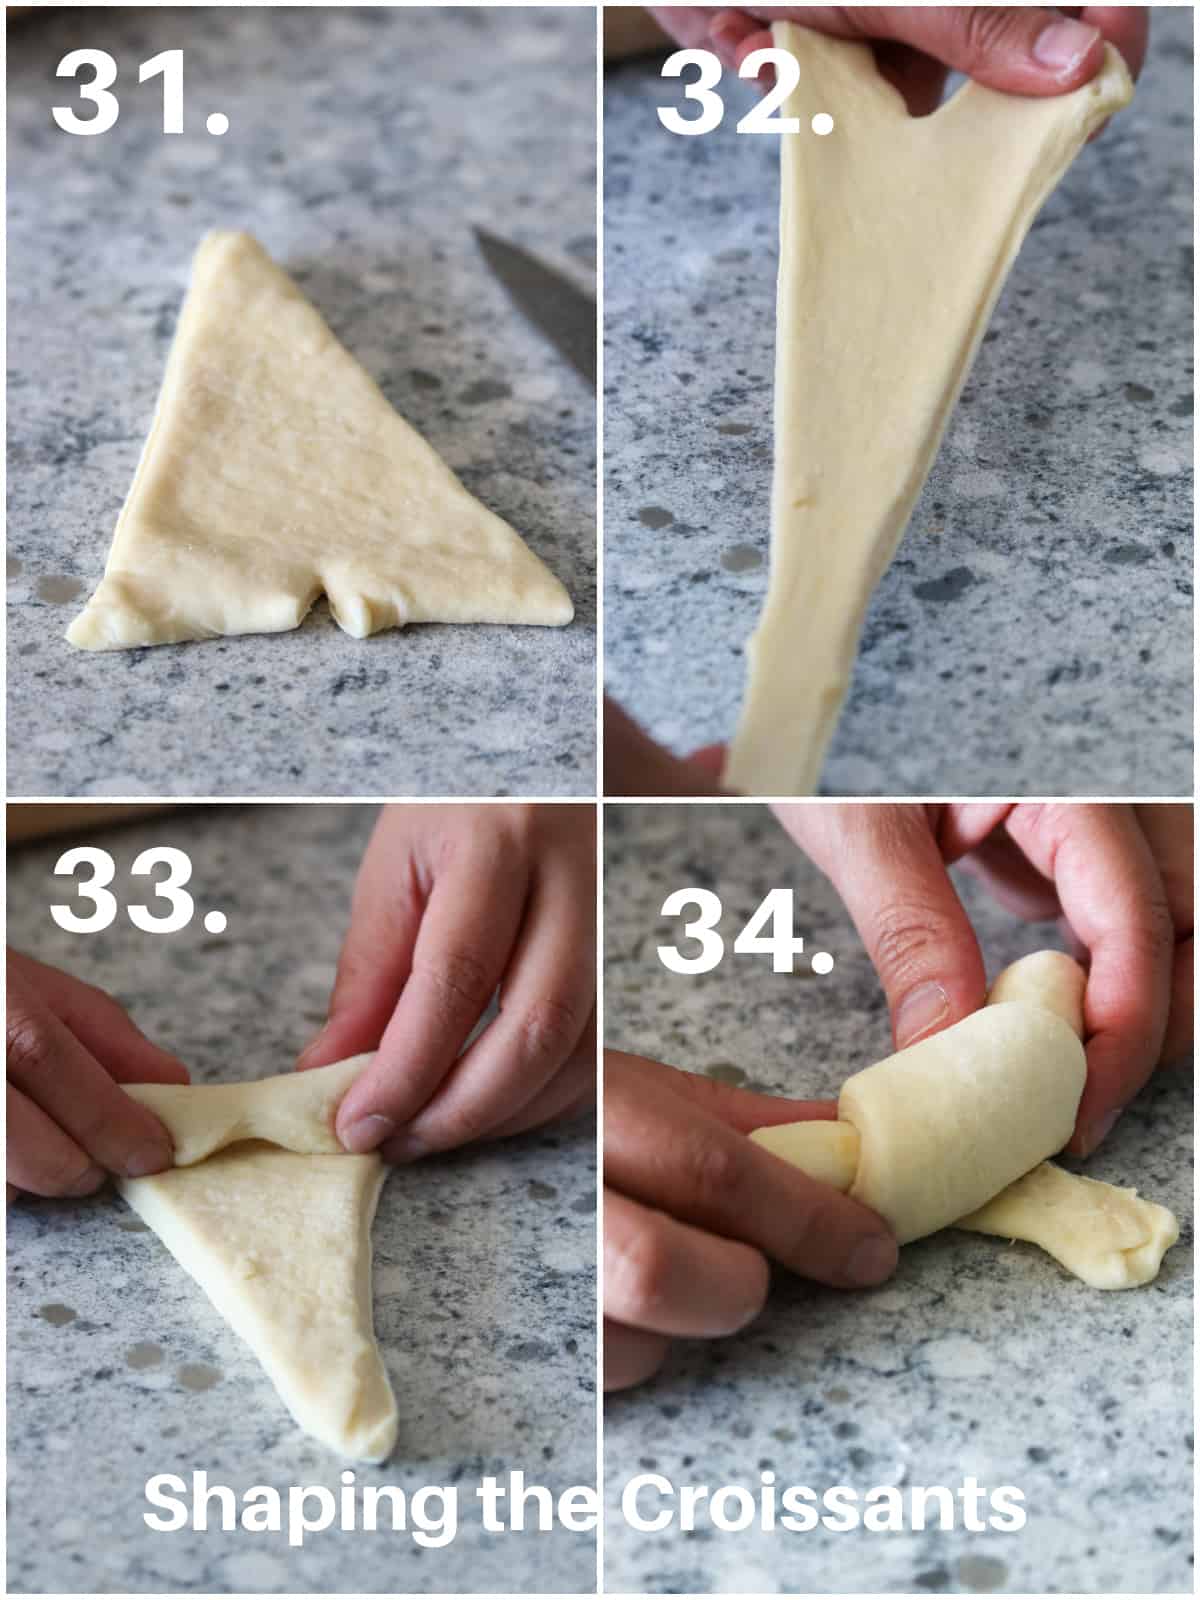 A photo collage showing the process of shaping the croissant.